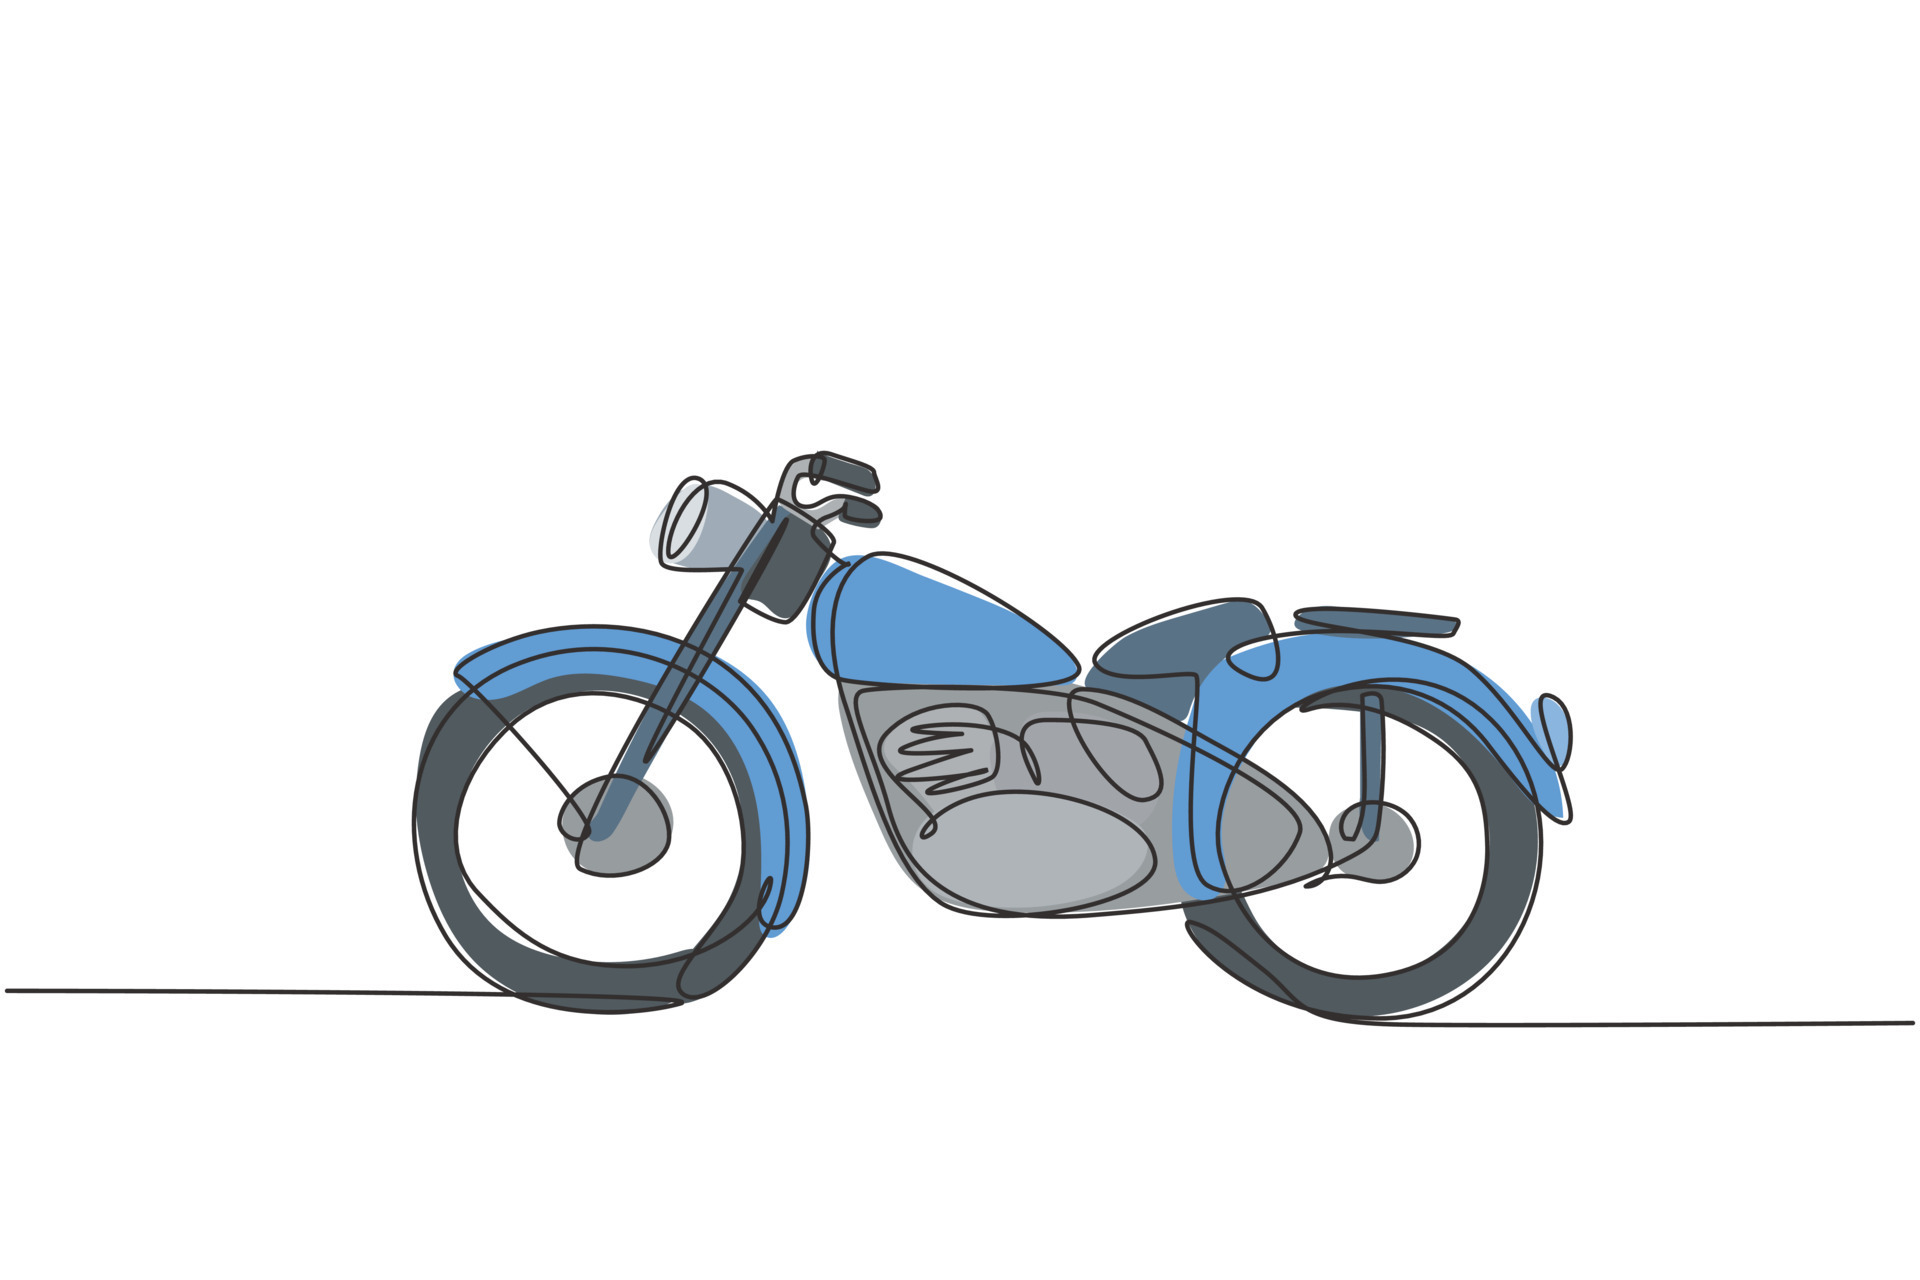 How To Draw A Motorcycle  Drawing and coloring for beginners  YouTube